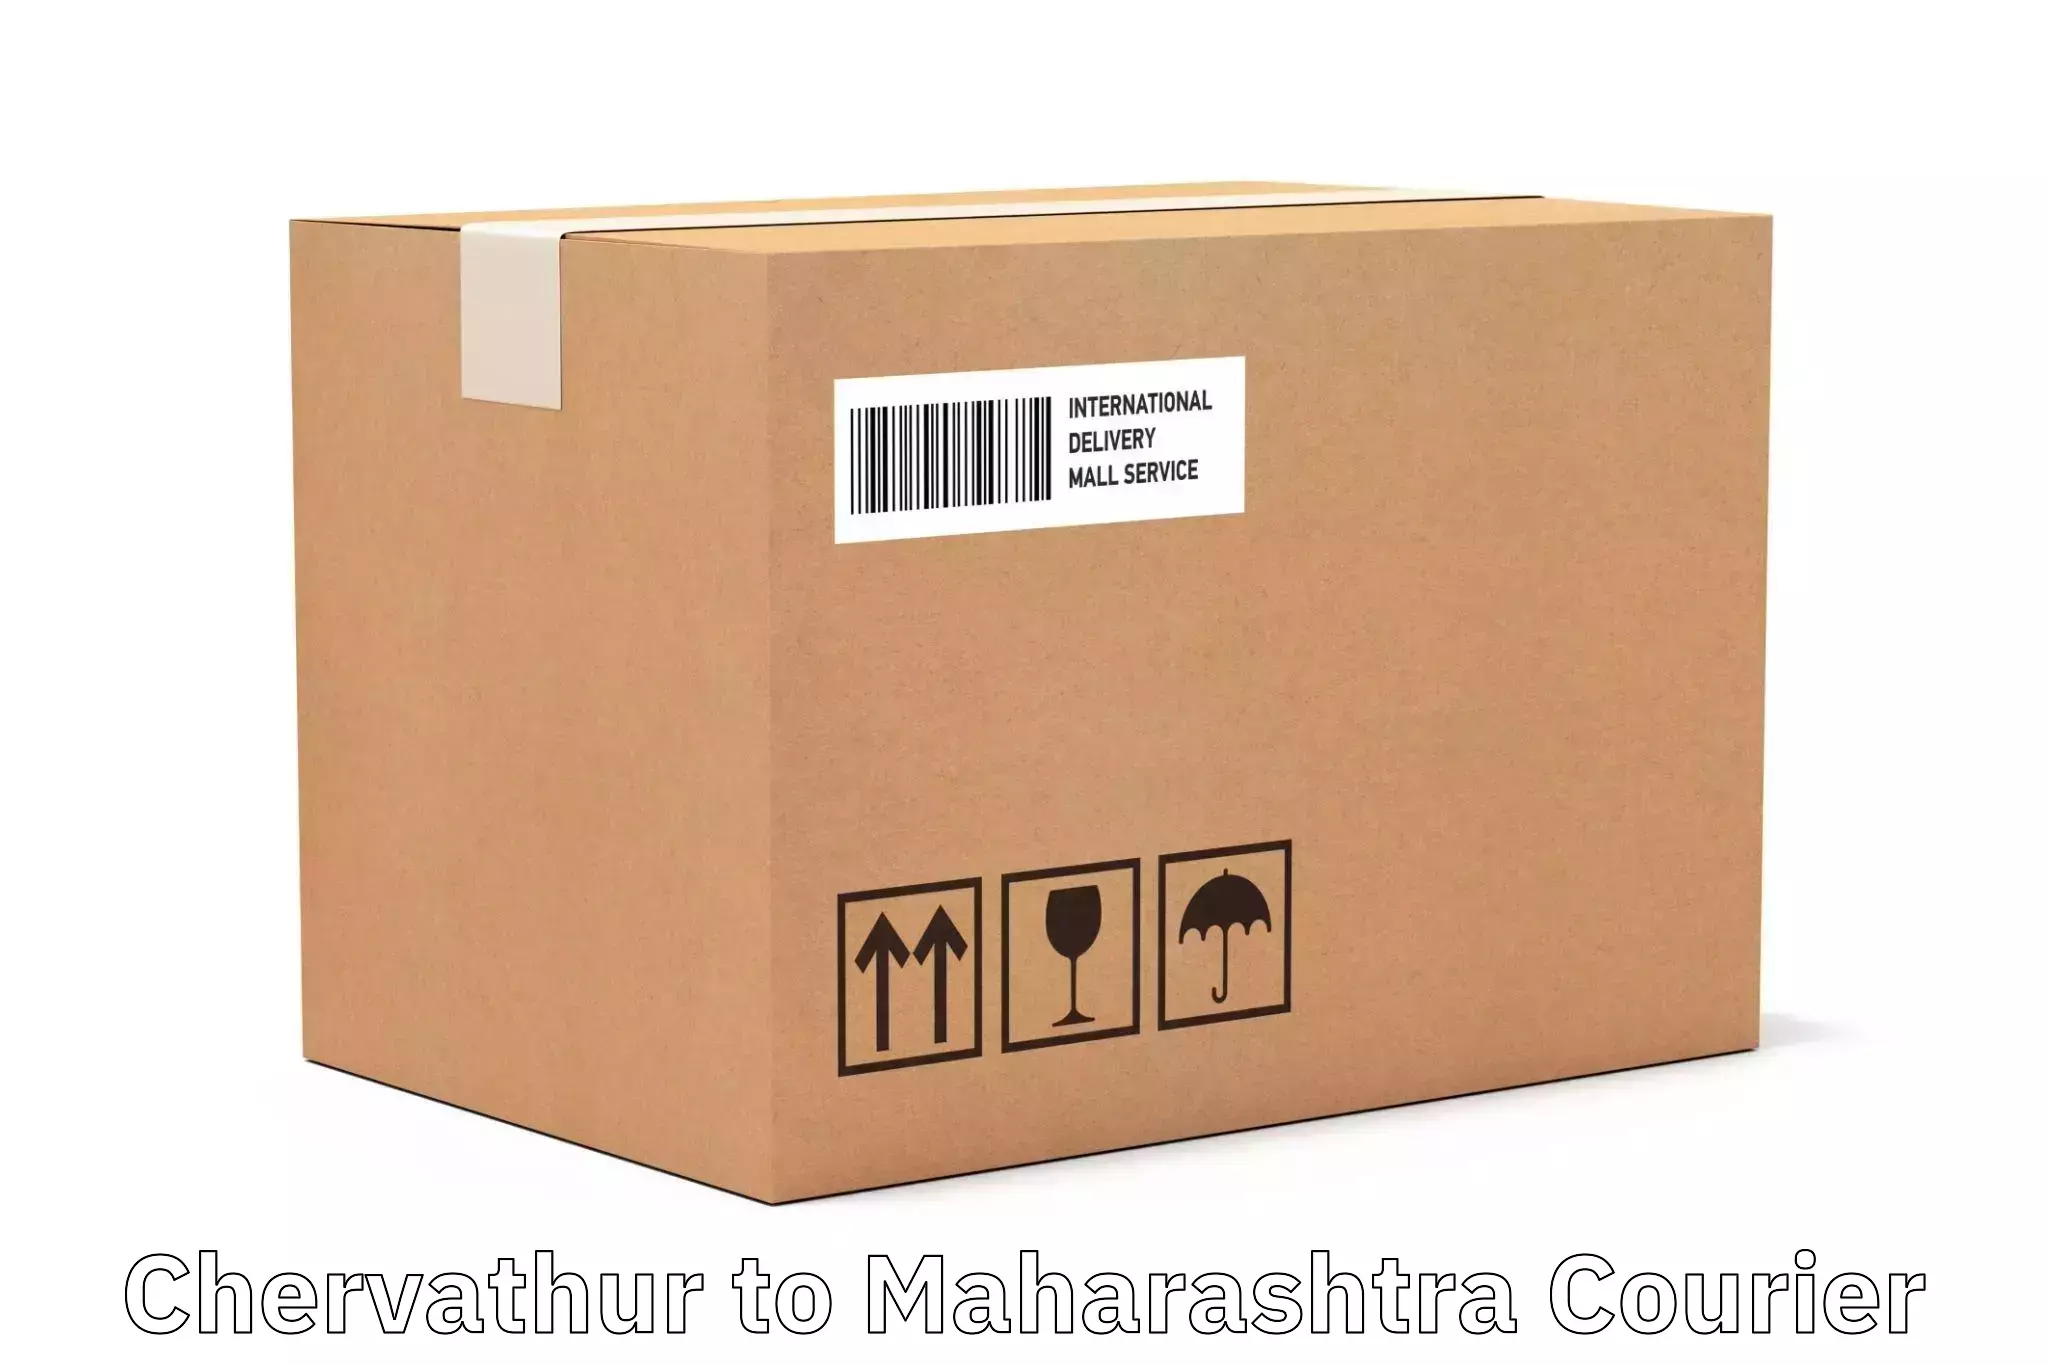 Reliable delivery network Chervathur to Mumbai Port